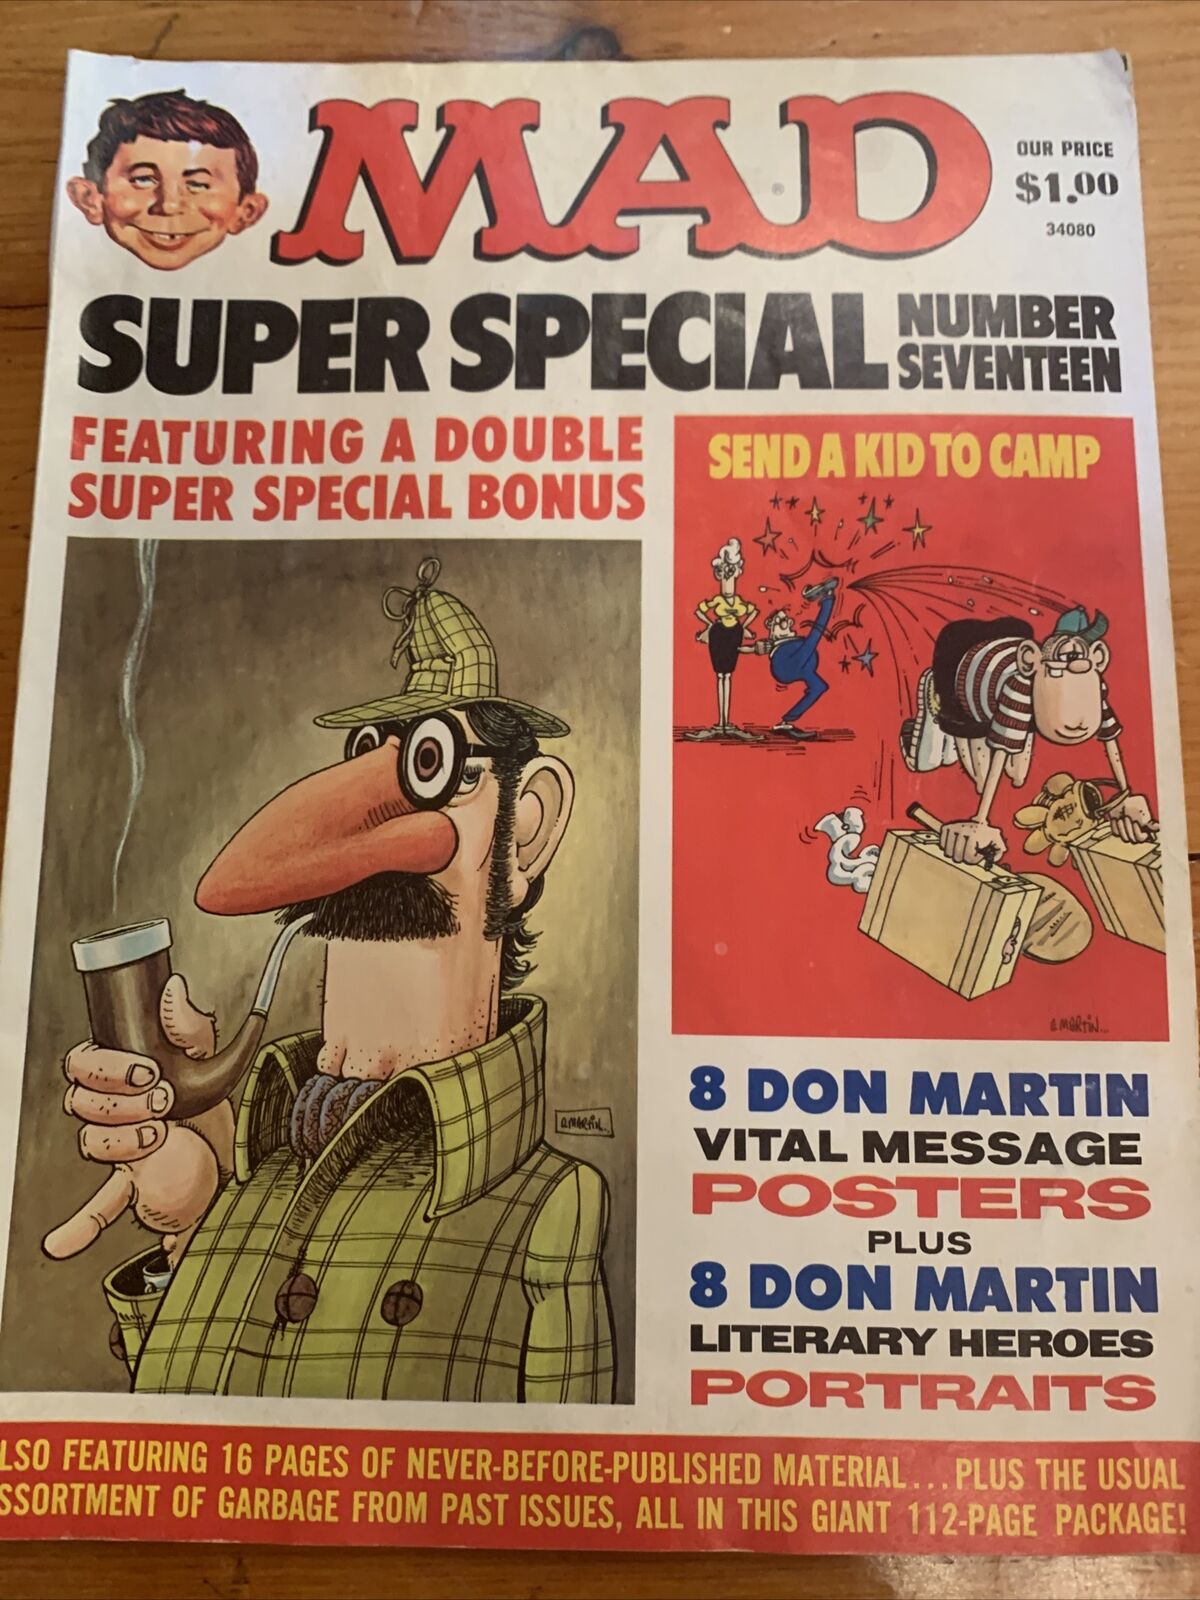 MAD SUPER SPECIAL - NO. 17, Featuring Don Martin posters & portraits